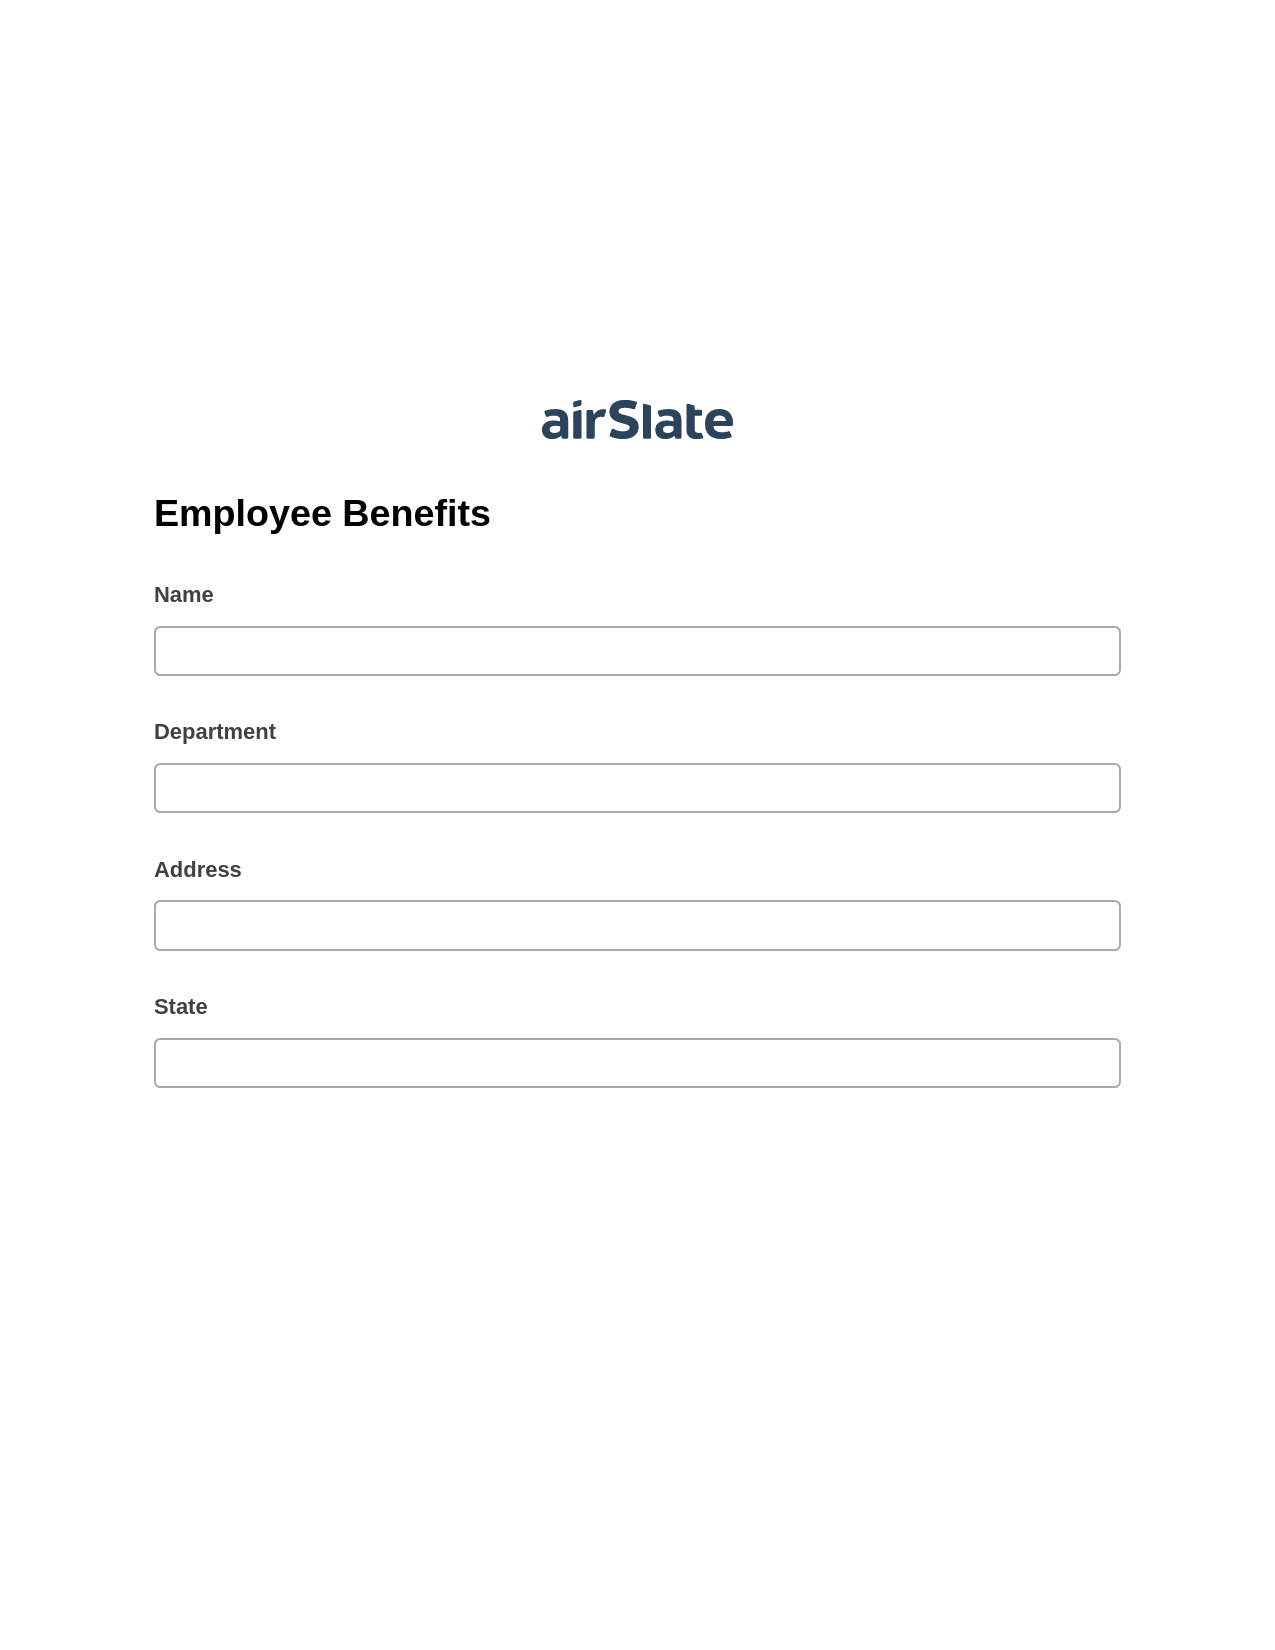 Employee Benefits Pre-fill Dropdown from Airtable, Send a Slate to MS Dynamics 365 Contact Bot, Archive to SharePoint Folder Bot